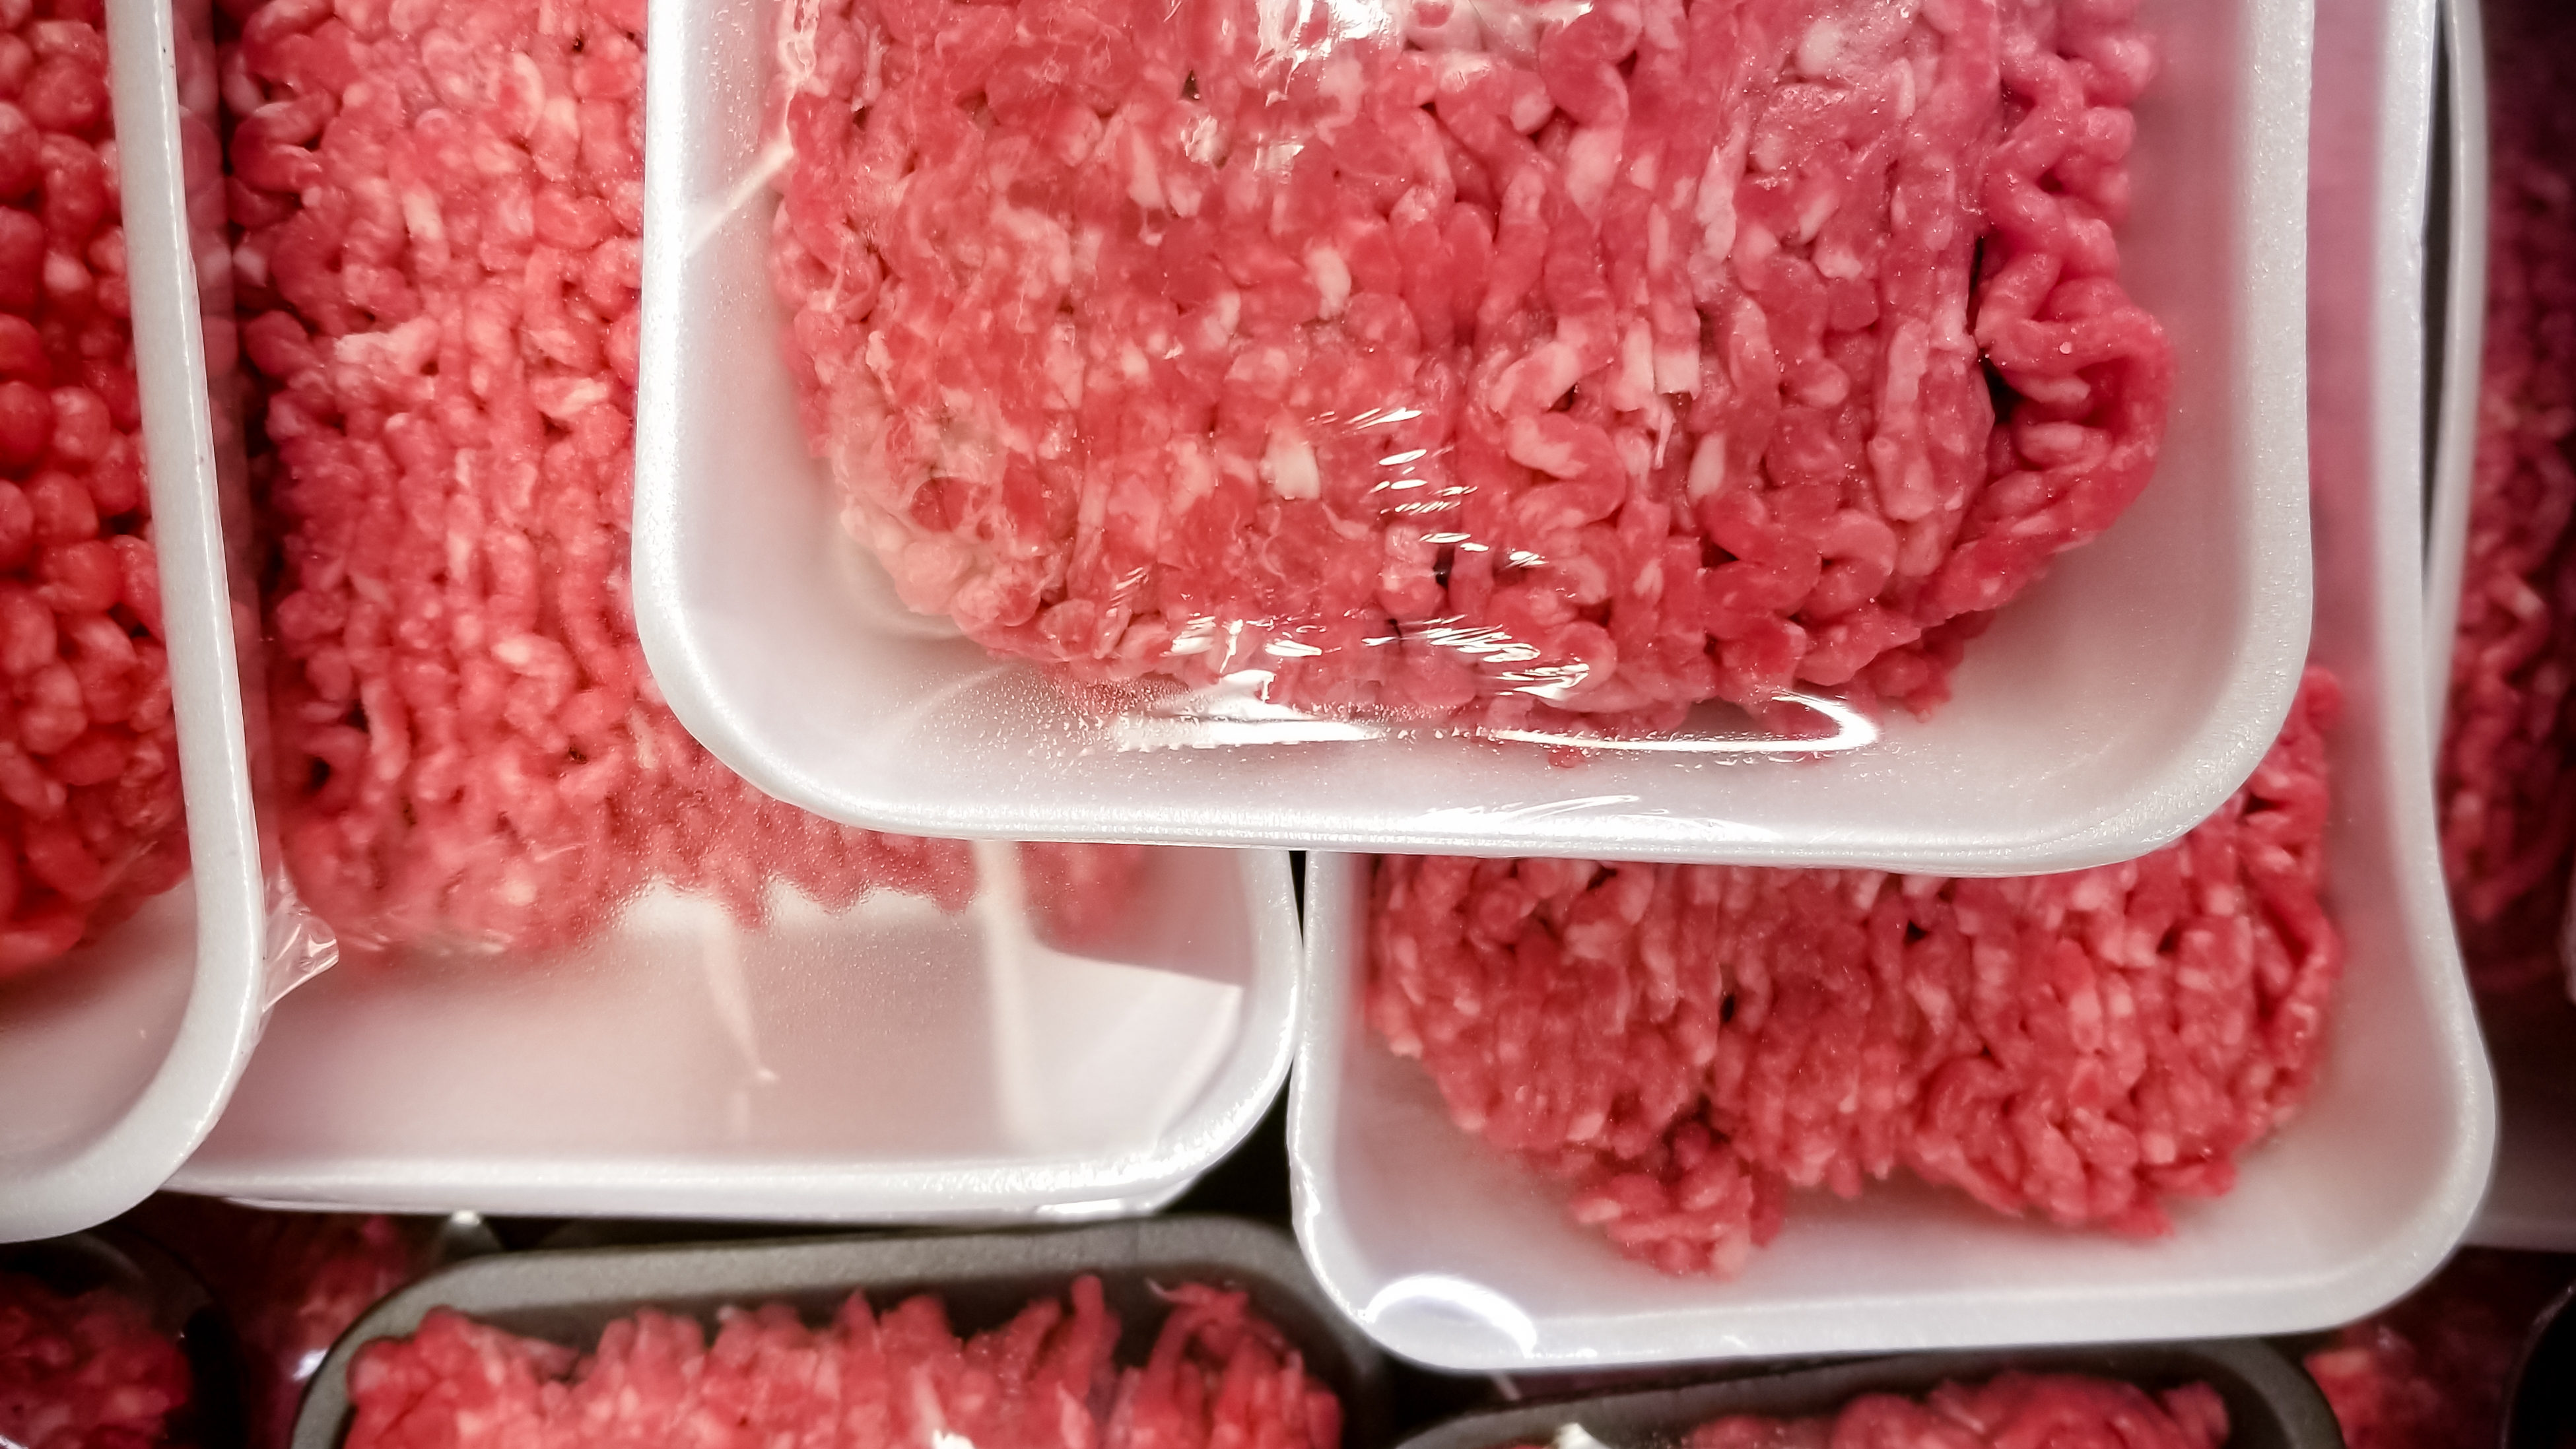 packaged hamburger meat on a grocery store shelf